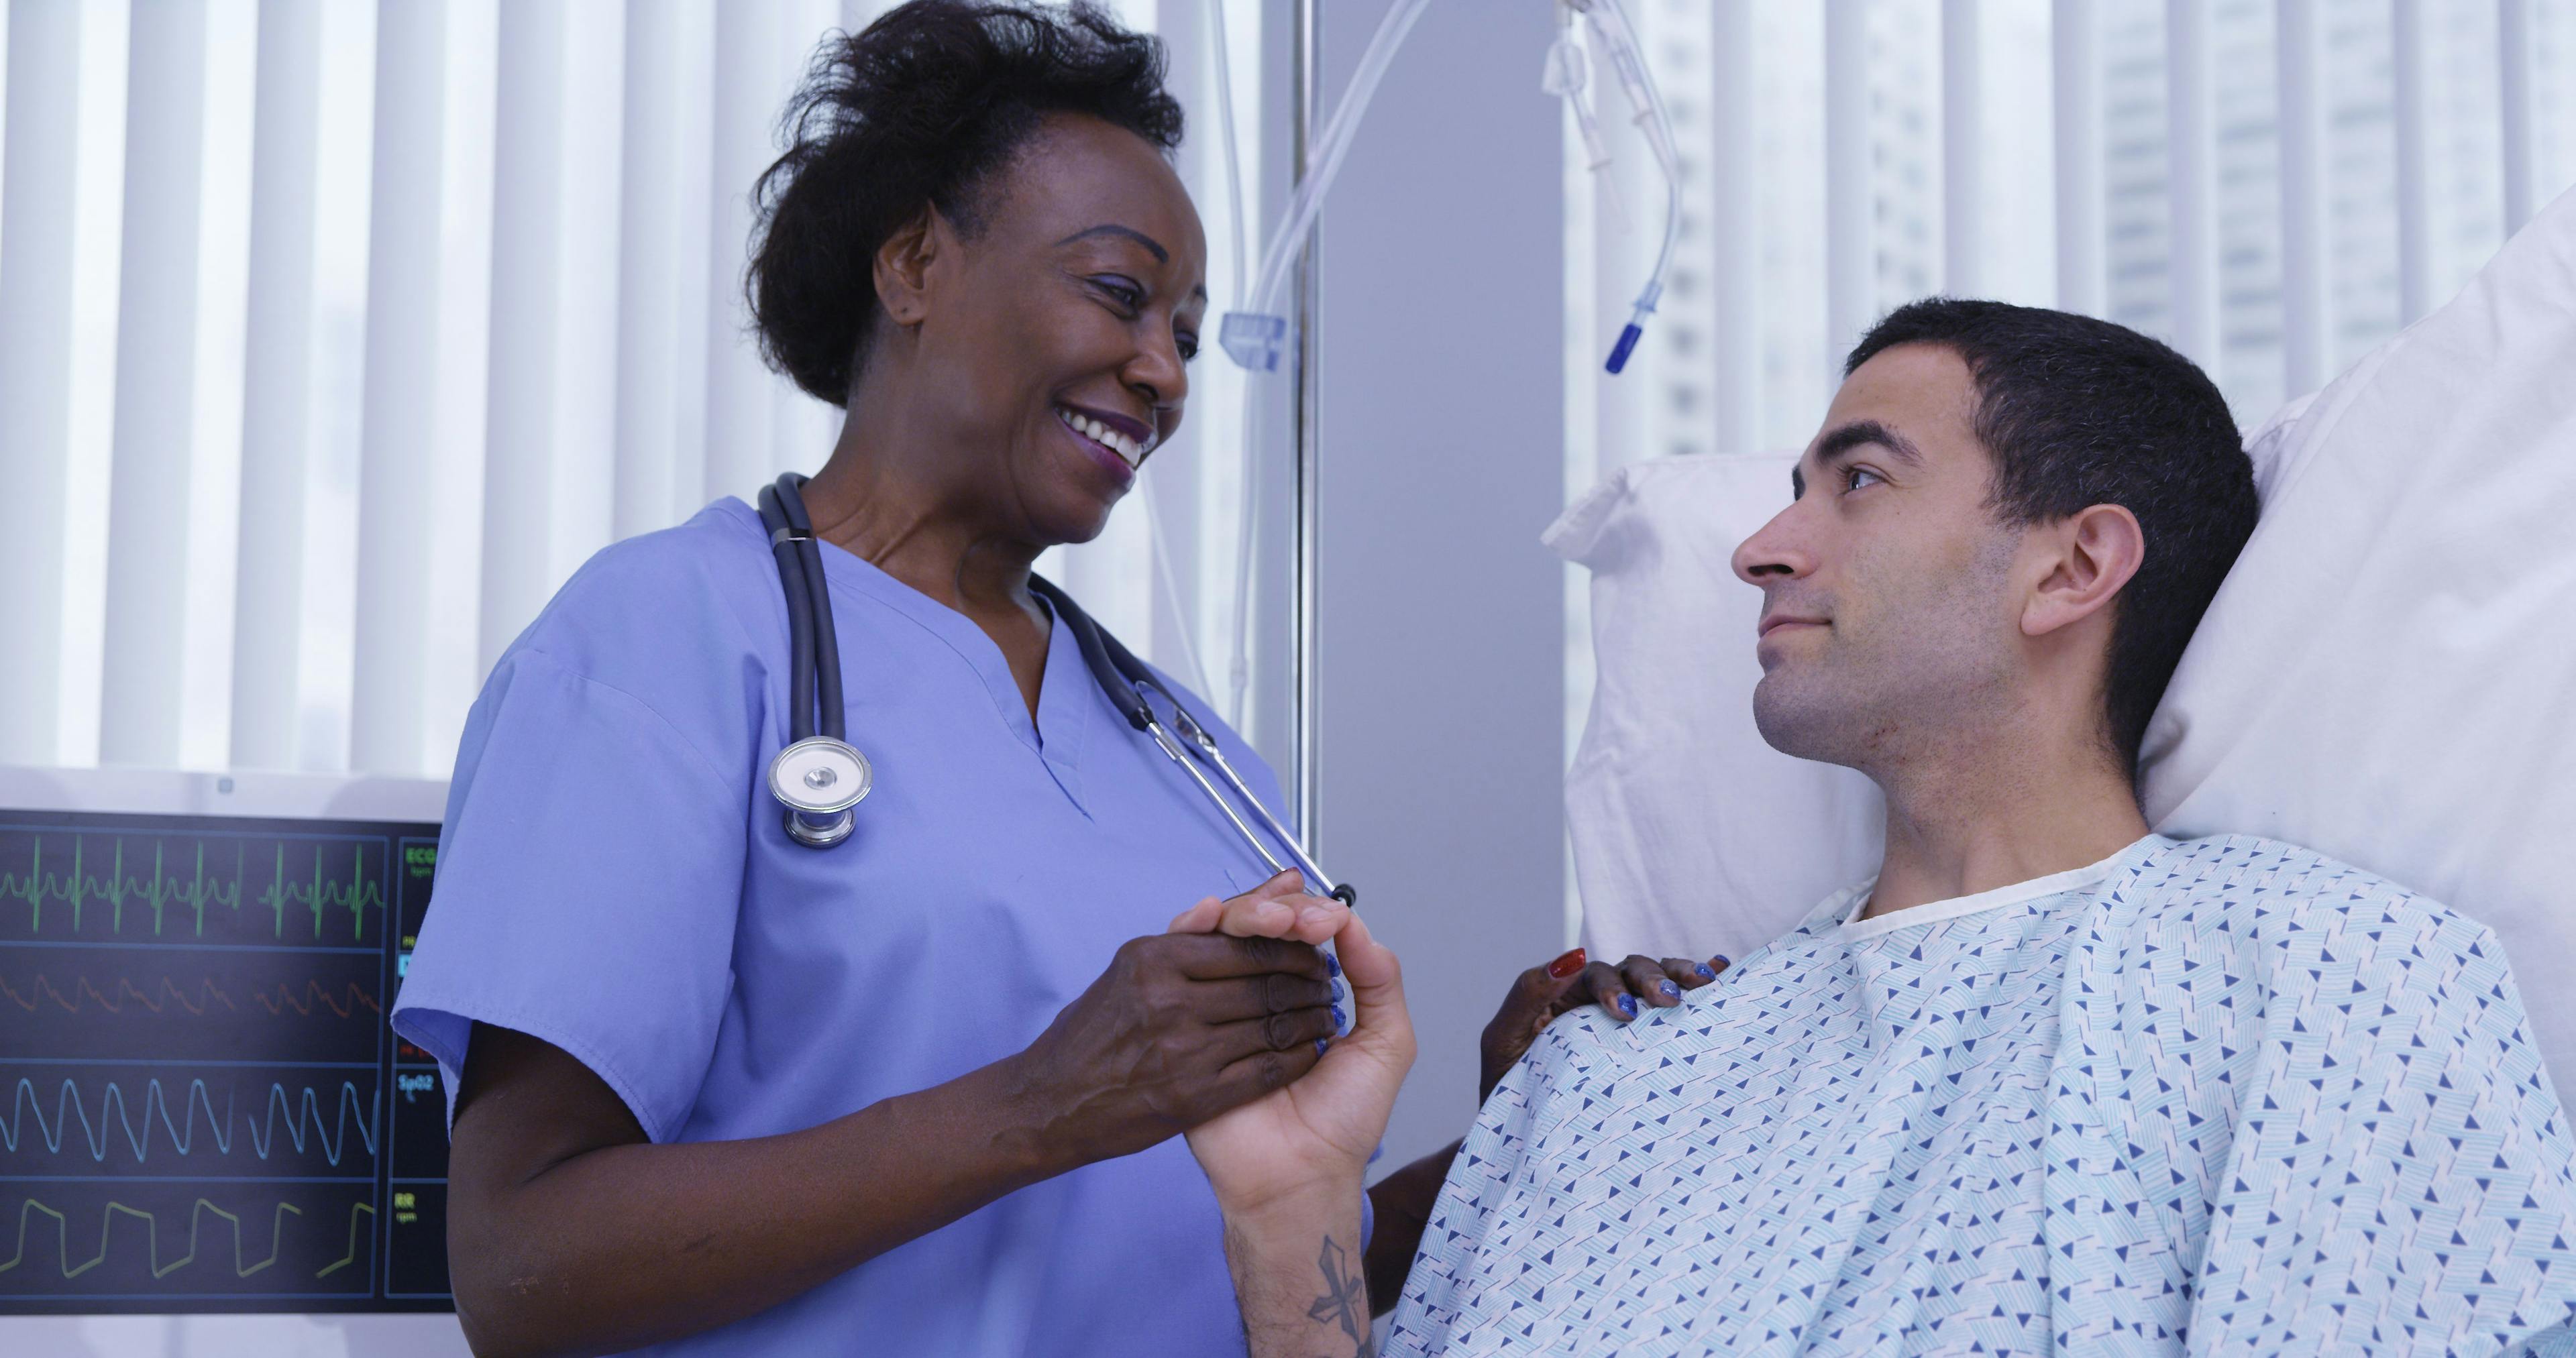 Rebuilding a strong and healthy nursing workforce | Viewpoint